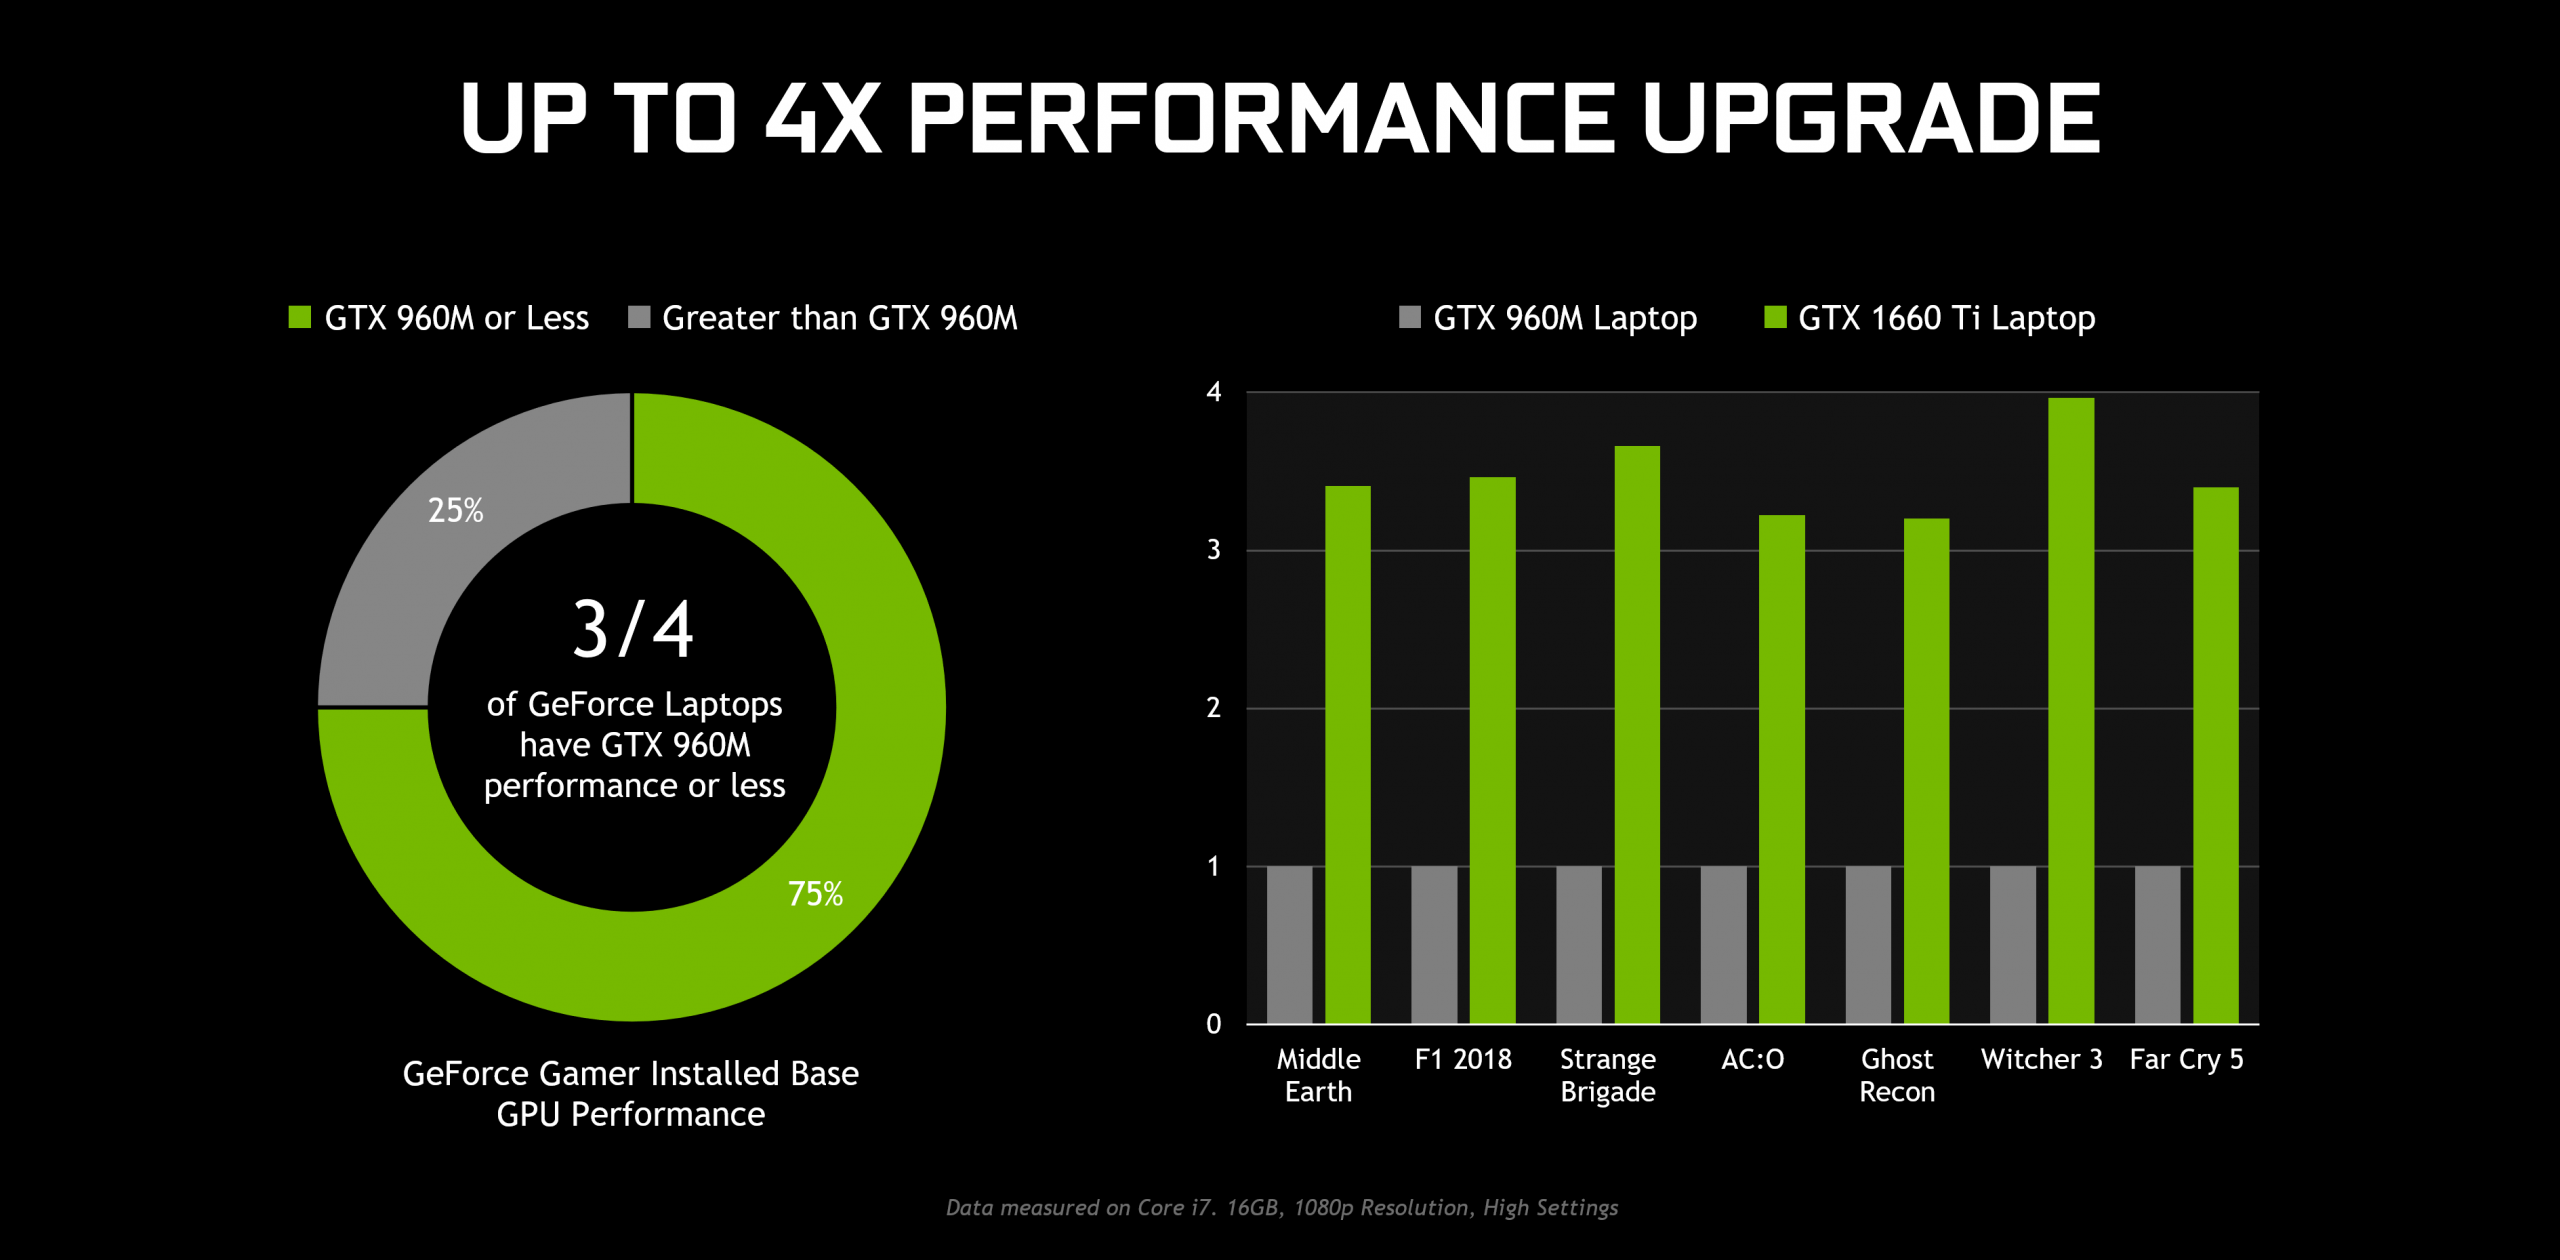 NVIDIA GeForce GTX 1660 vs GTX 1650 - TU116 is faster but do you need all that | LaptopMedia.com